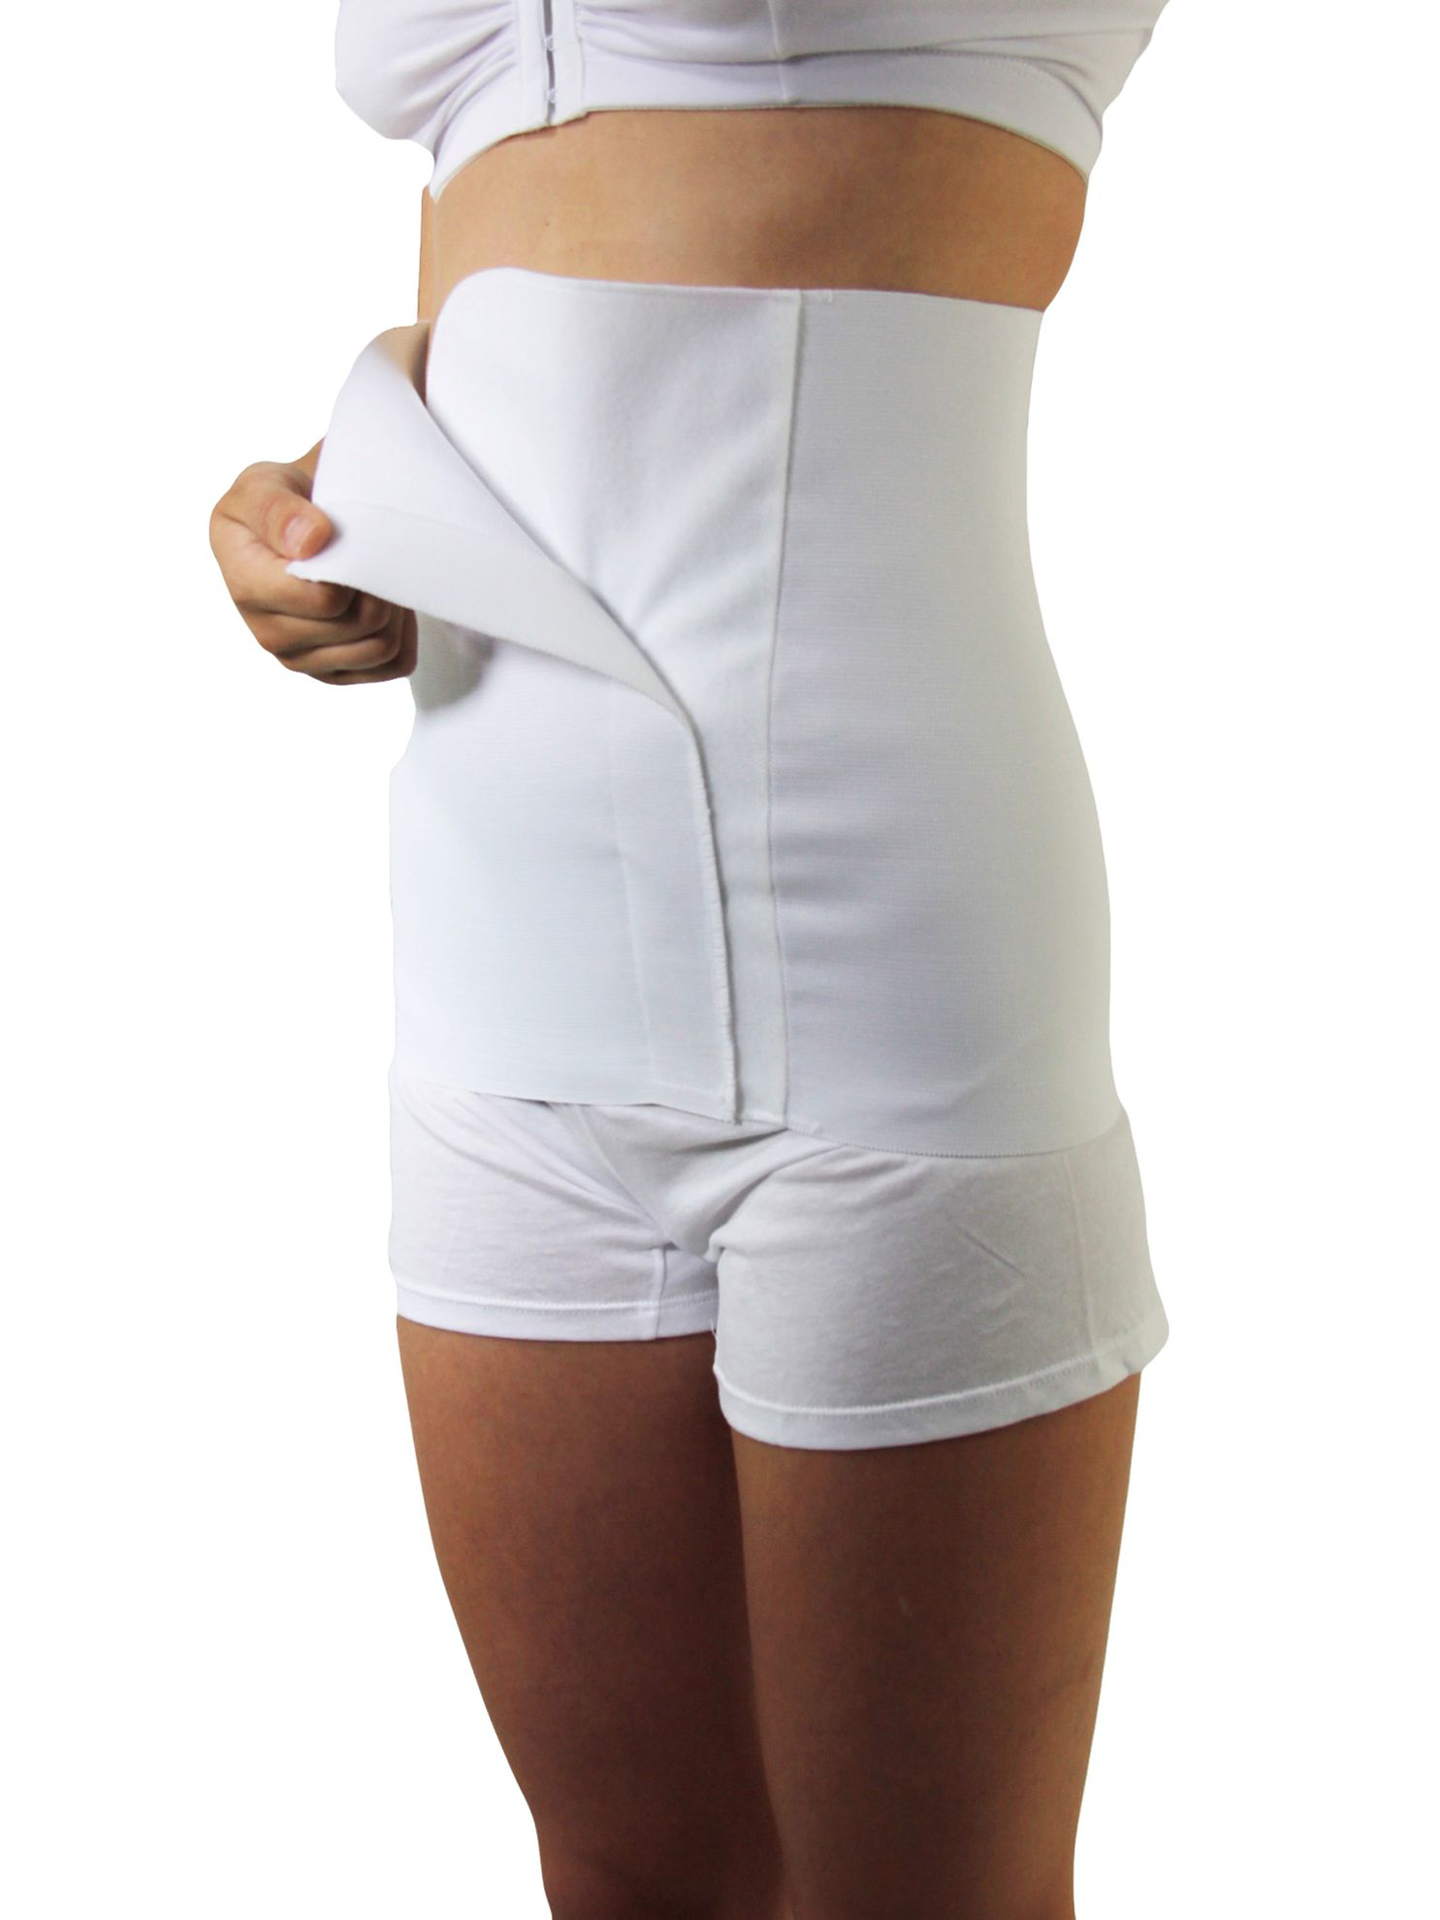 Underworks Post Delivery Abdominal Binder 12-inch with Velcro Closure -  White - XS